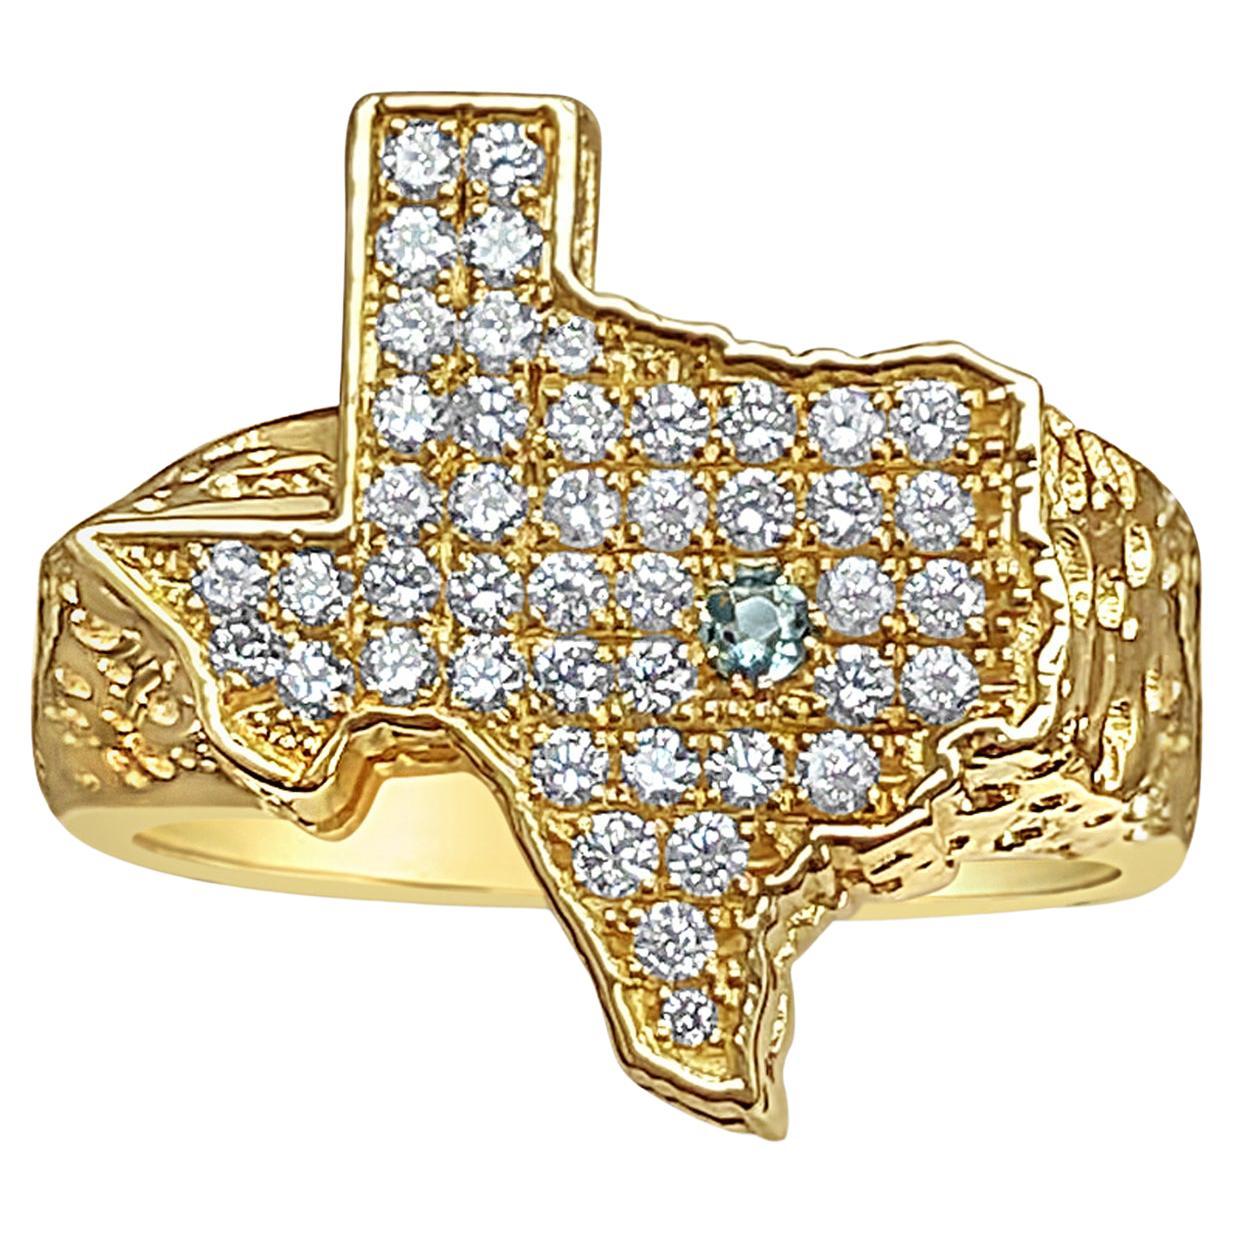 TEXAS shaped Diamond Nugget Ring in 14k White Gold or 14k Yellow Gold For Sale